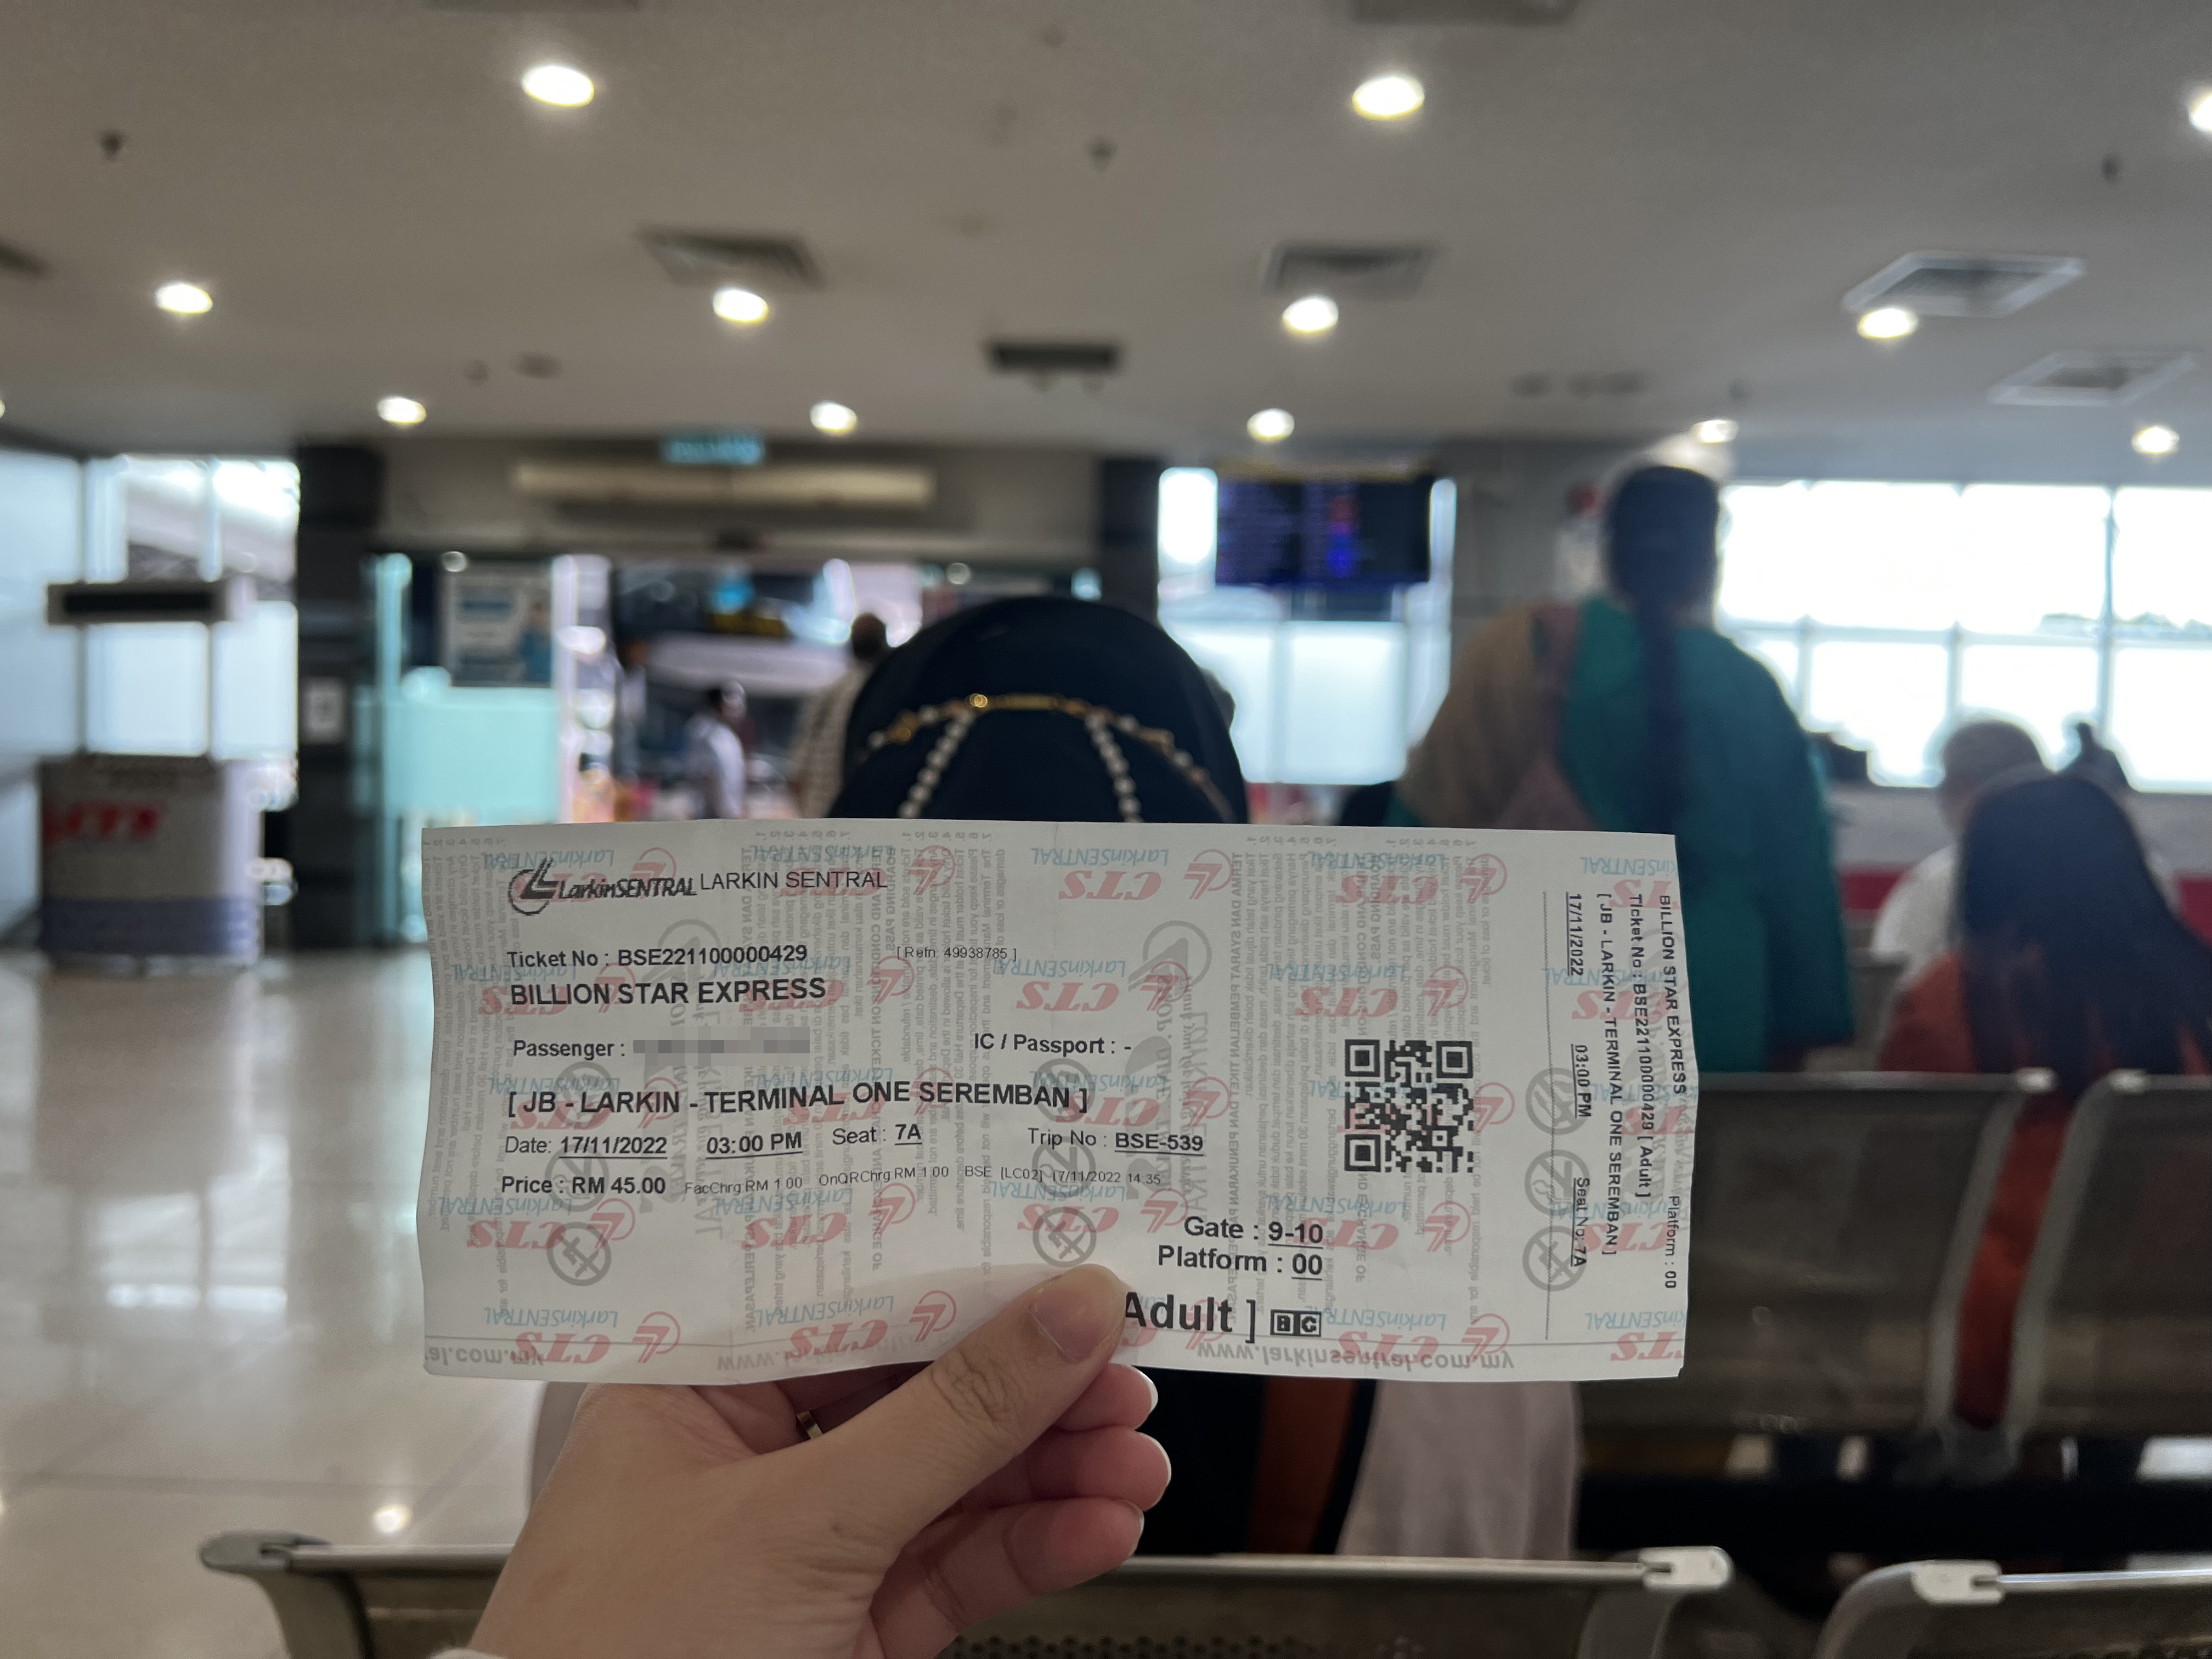 Sarah's bus ticket for the trip back to Malaysia